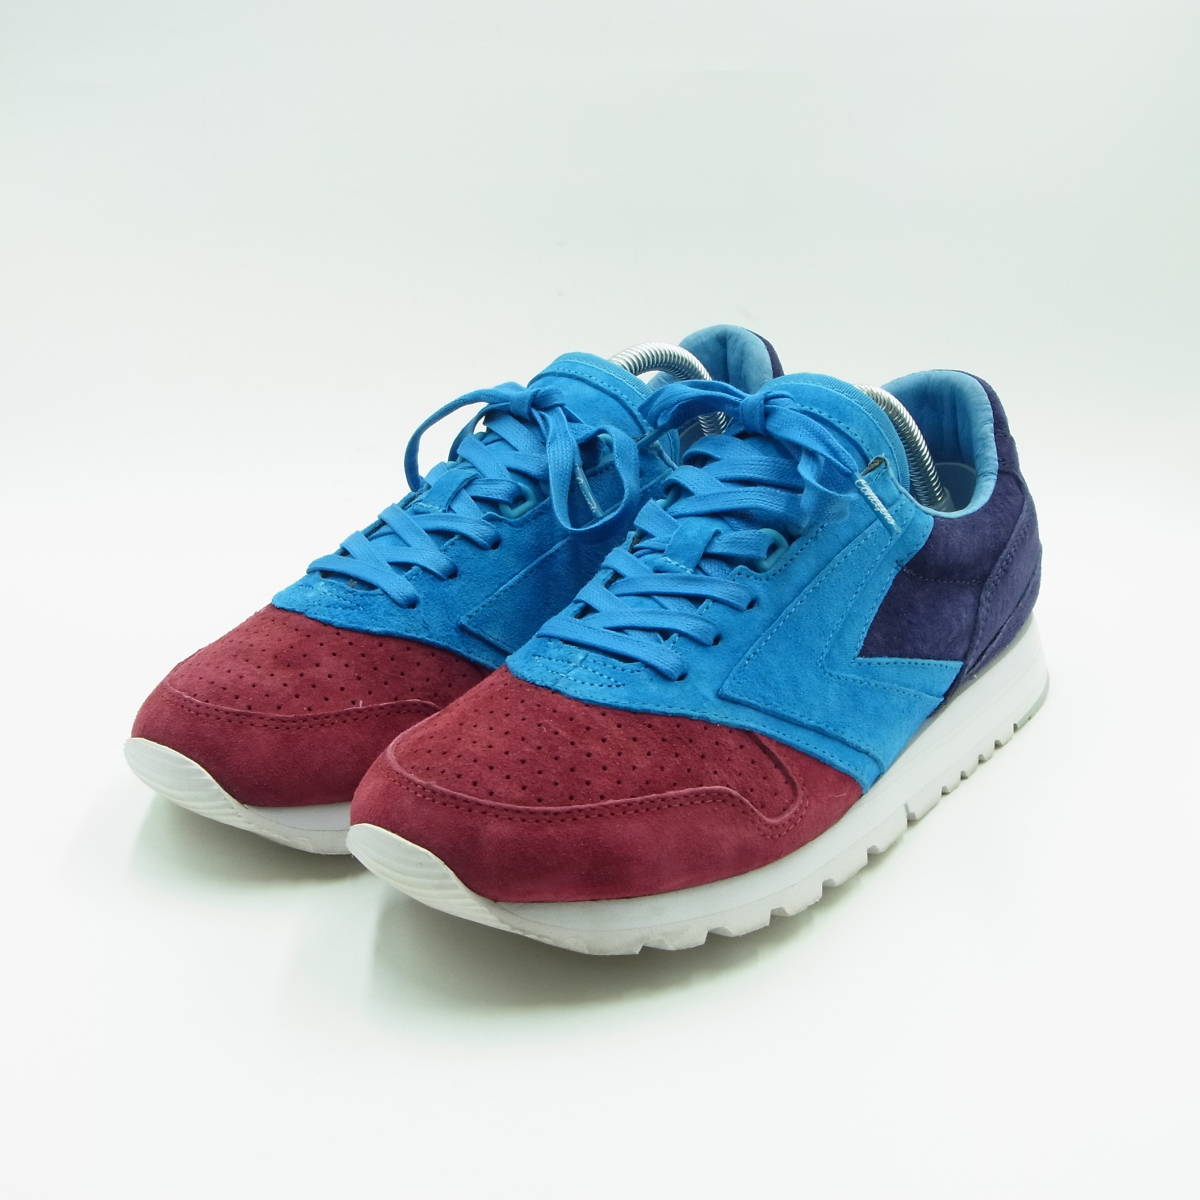 Concepts x Brooks / Chariot / Royal & Navy & Red / US9.5 27.5cm ブルックス コンセプツ 海外限定 ランニング ジョギング